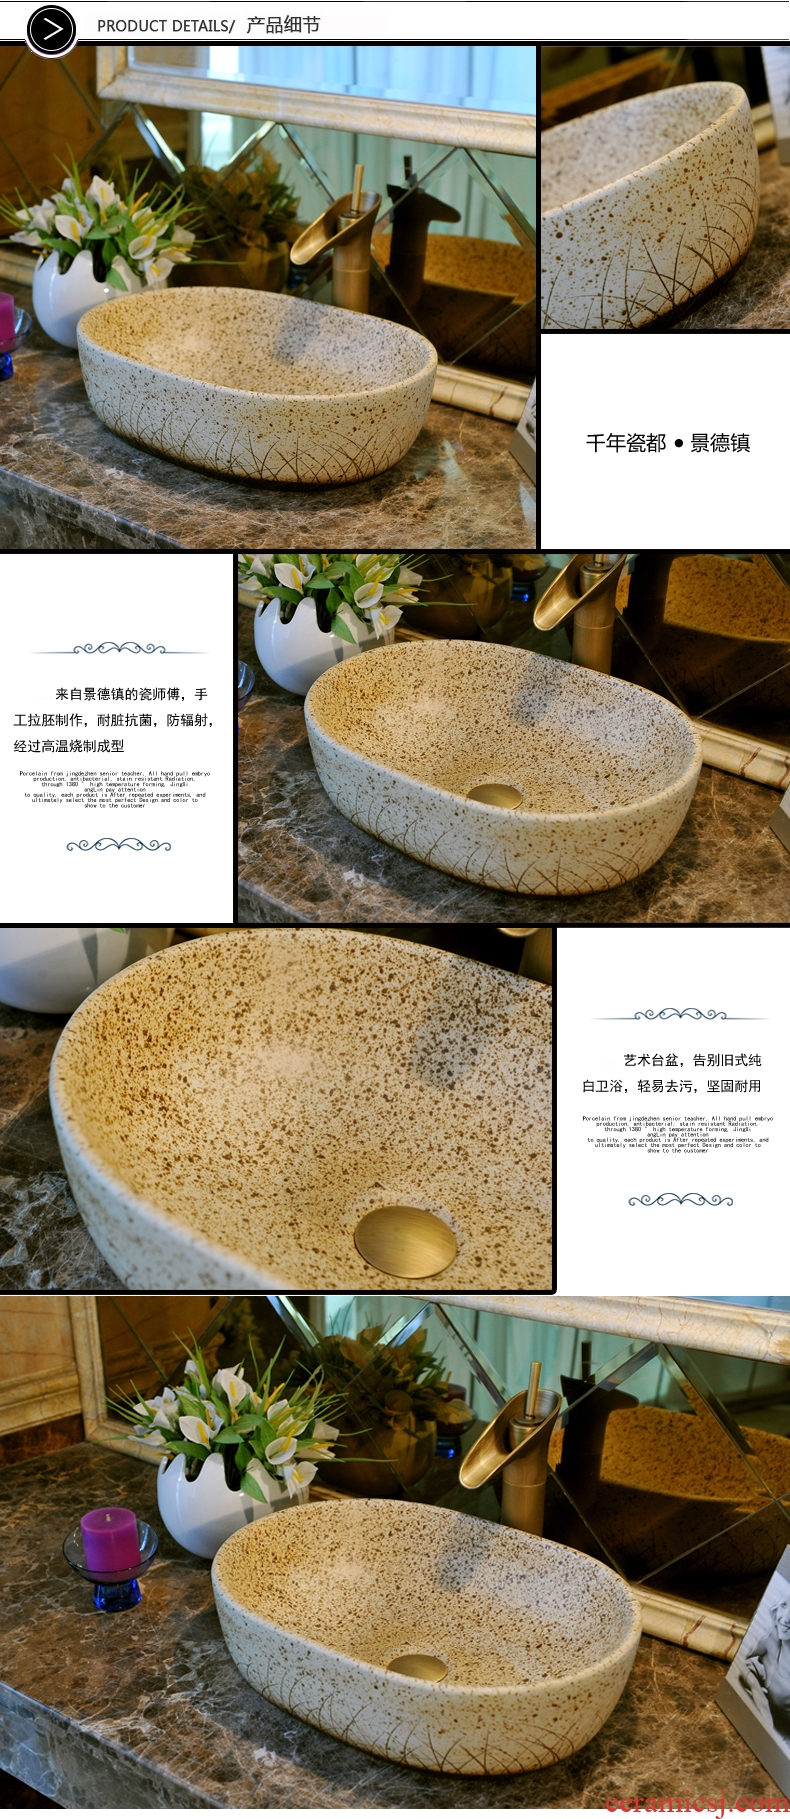 Lavatory ceramic european-style oblong contracted art lavatory toilet lavabo stage basin